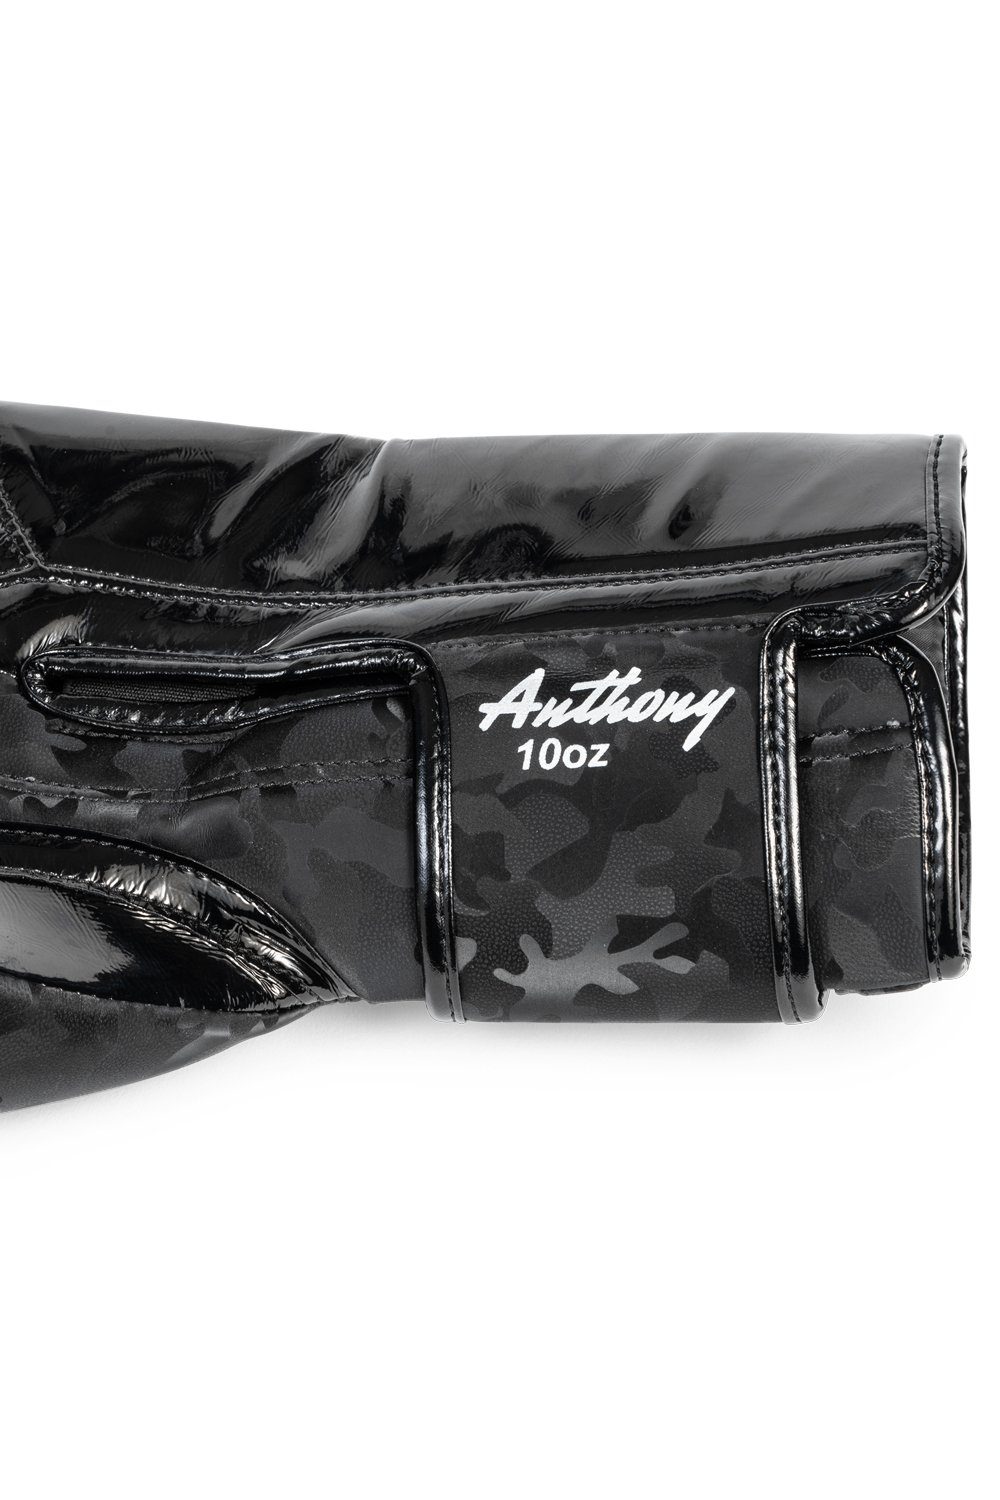 Benlee Rocky ANTHONY Boxhandschuhe Marciano